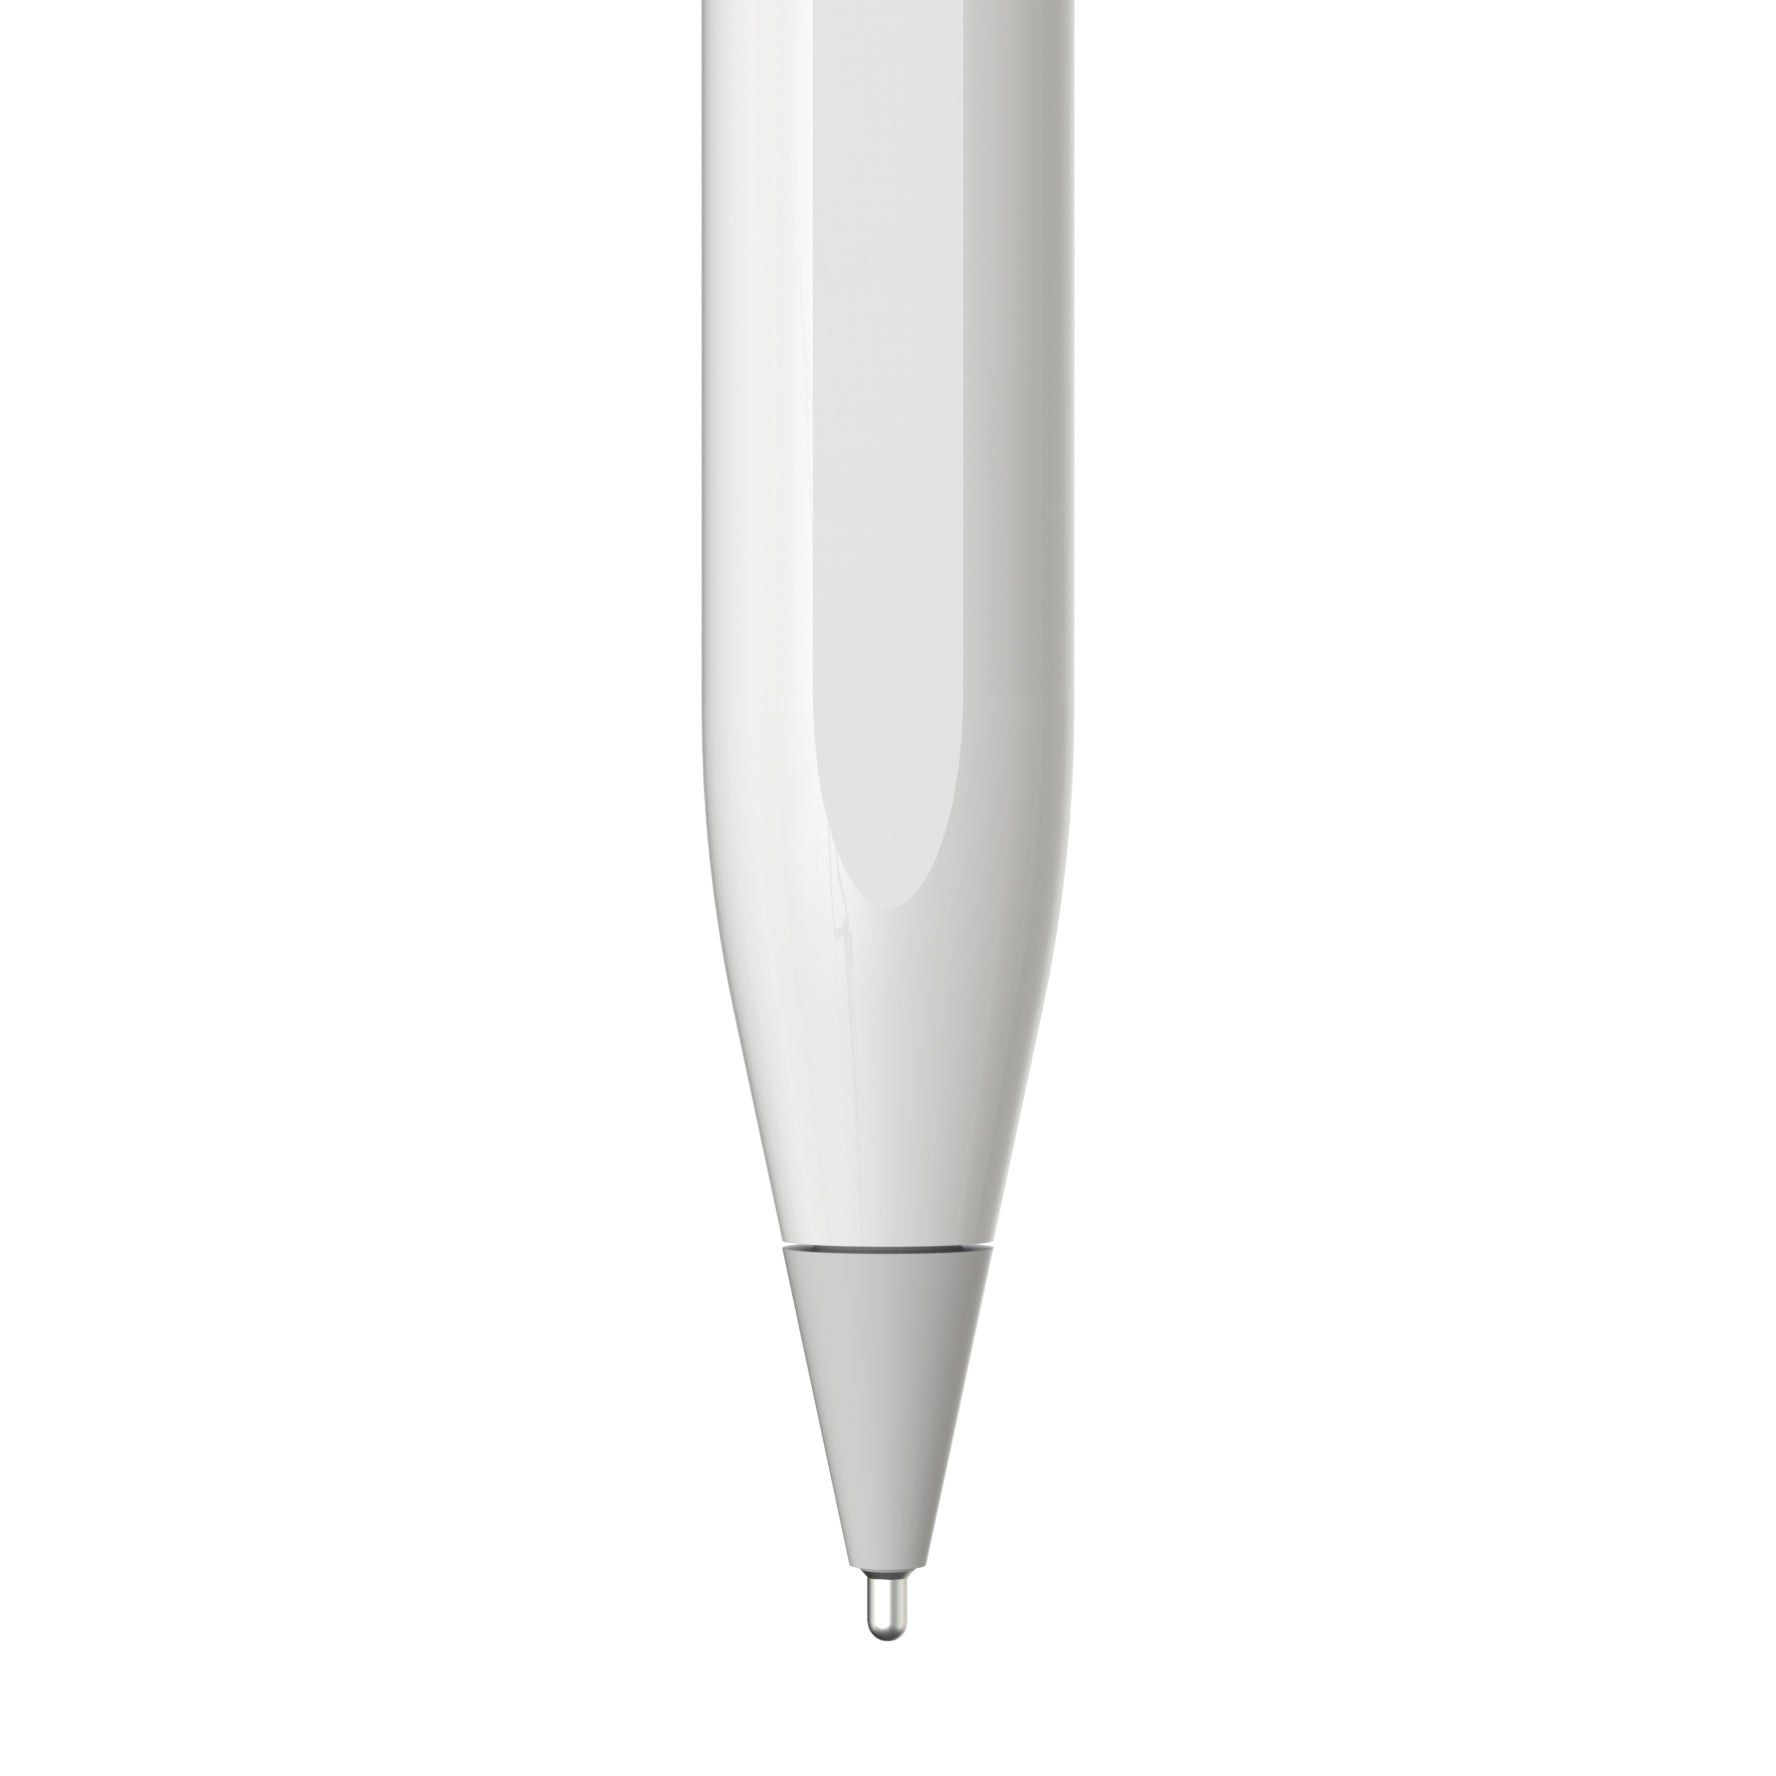 SwitchEasy Writing Tip For EasyPencil Pro 4/ Apple Pencil Default SwitchEasy 